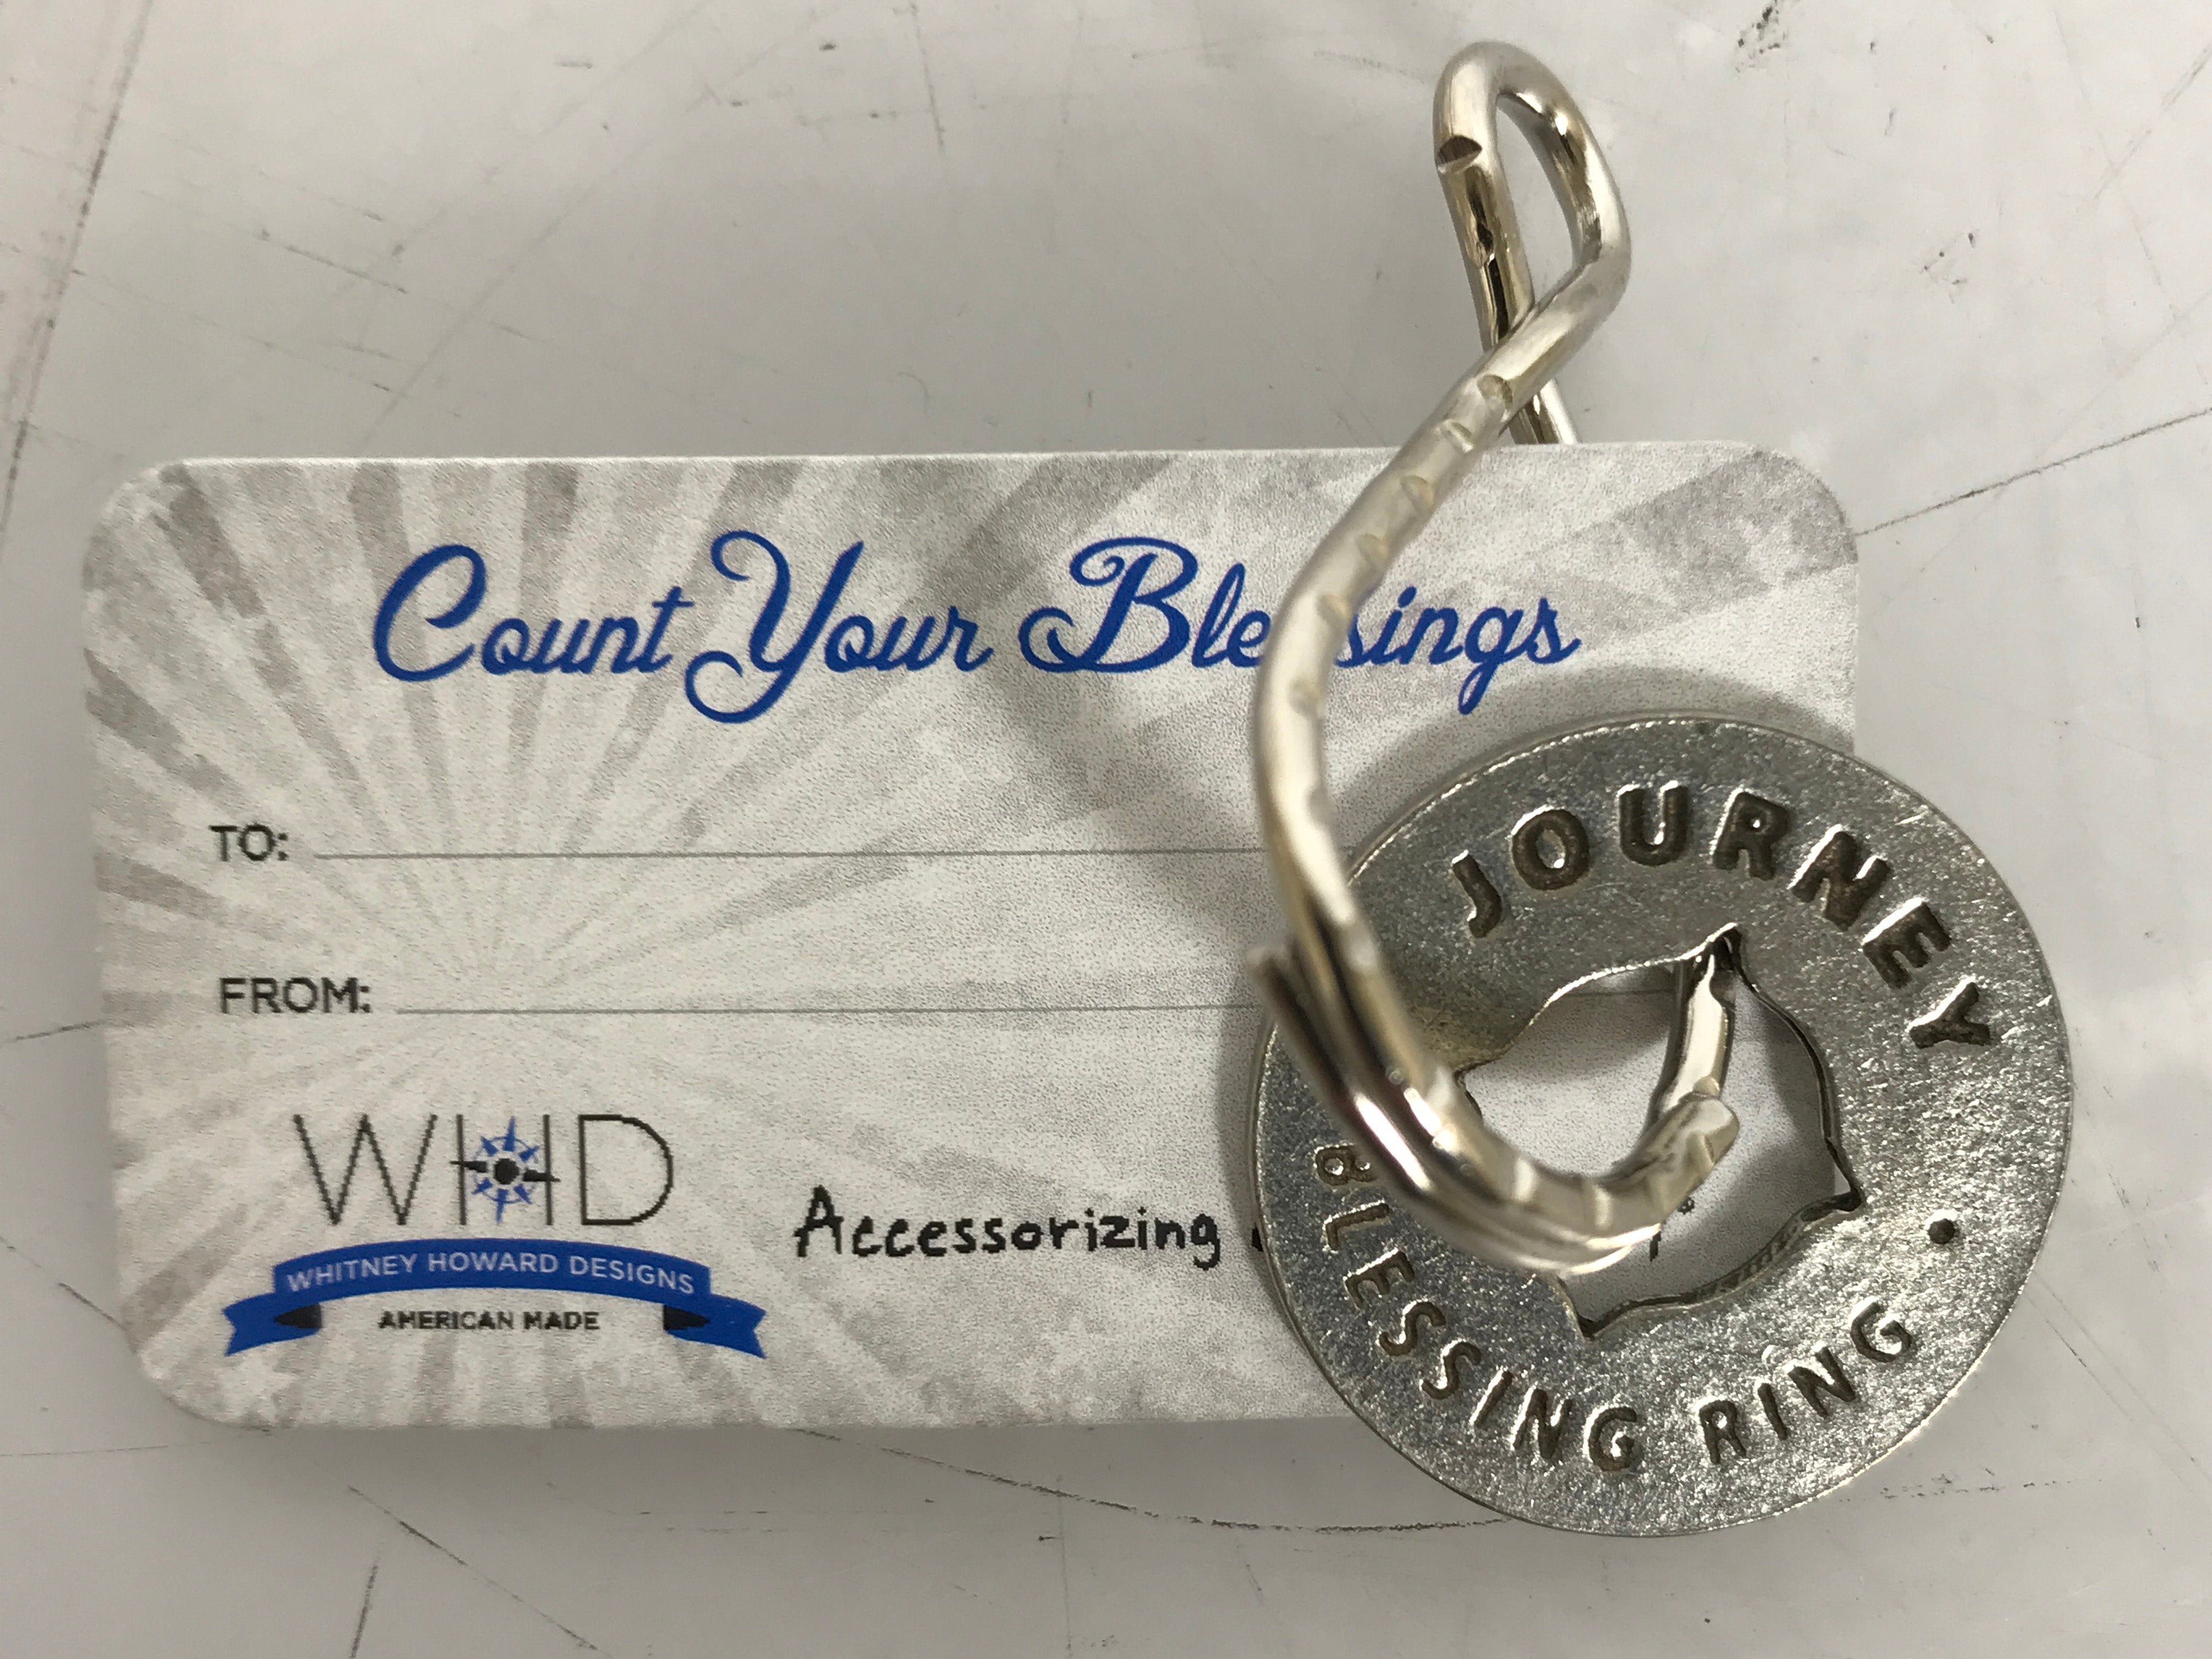 WHD BlessingRings "Journey" Keychain